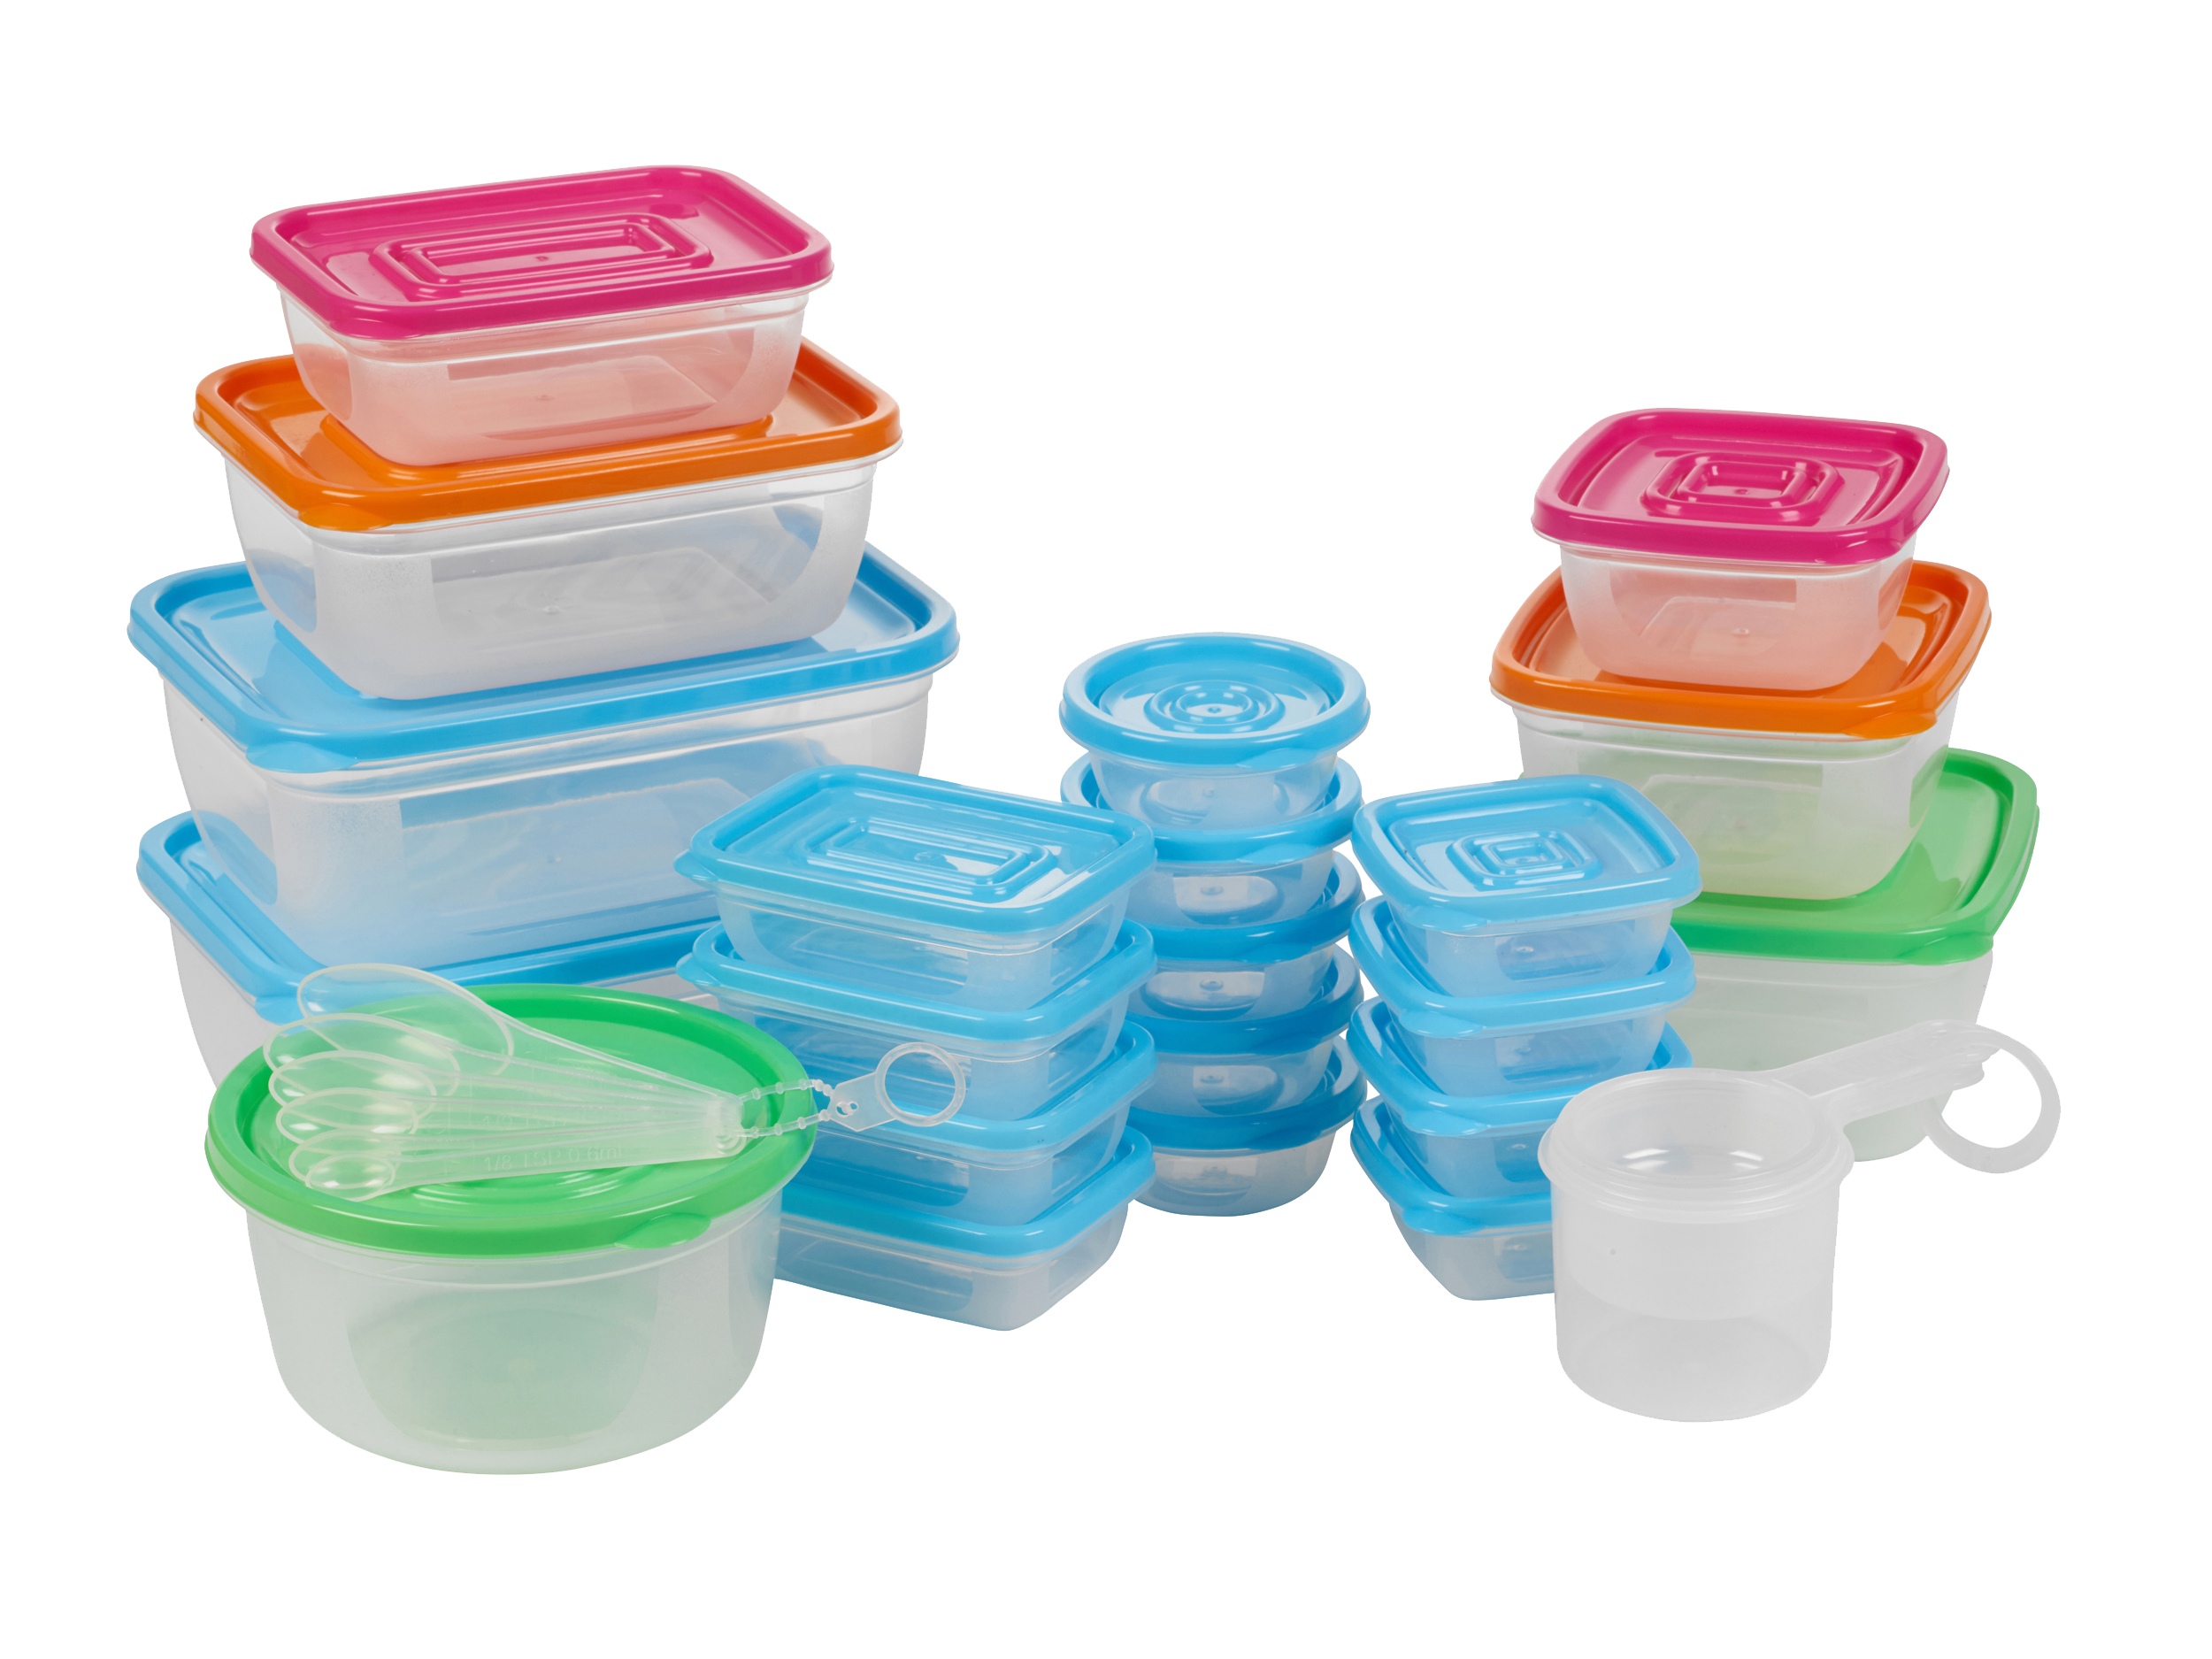 Plastic Containers For Food. [48 Sets] 16 oz. Plastic Deli